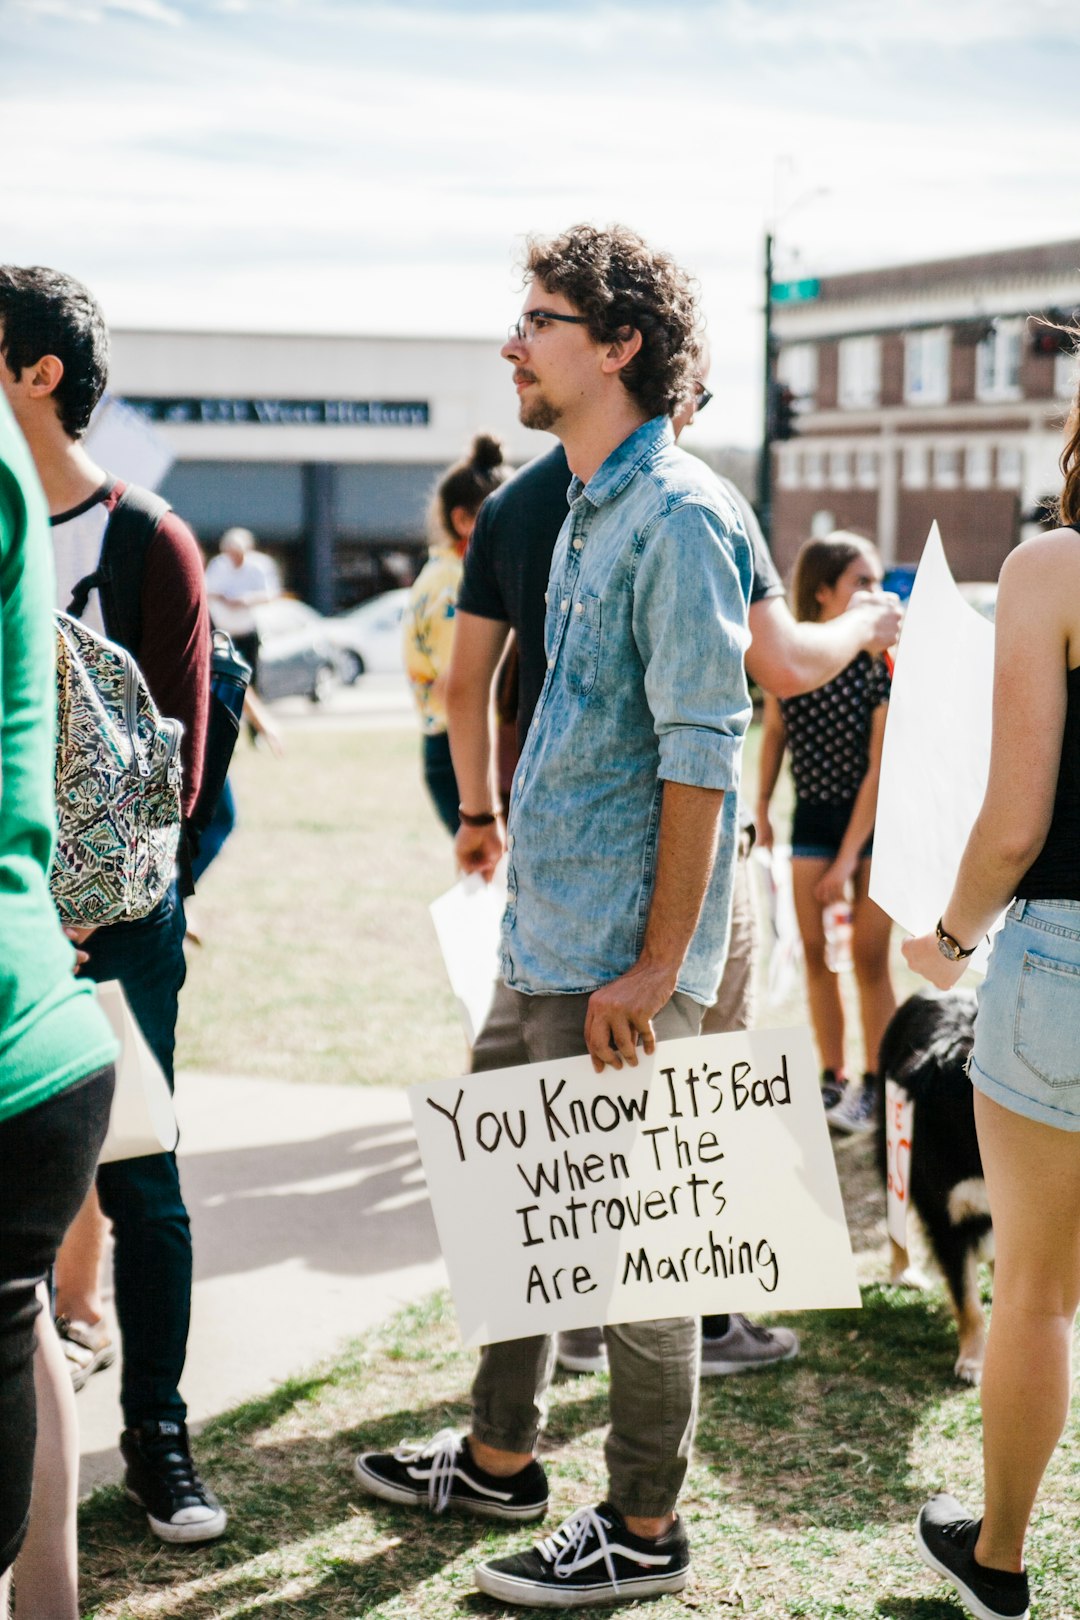 An attendee of the March for Our Lives rally in Denton, Texas, representing fellow introverts.